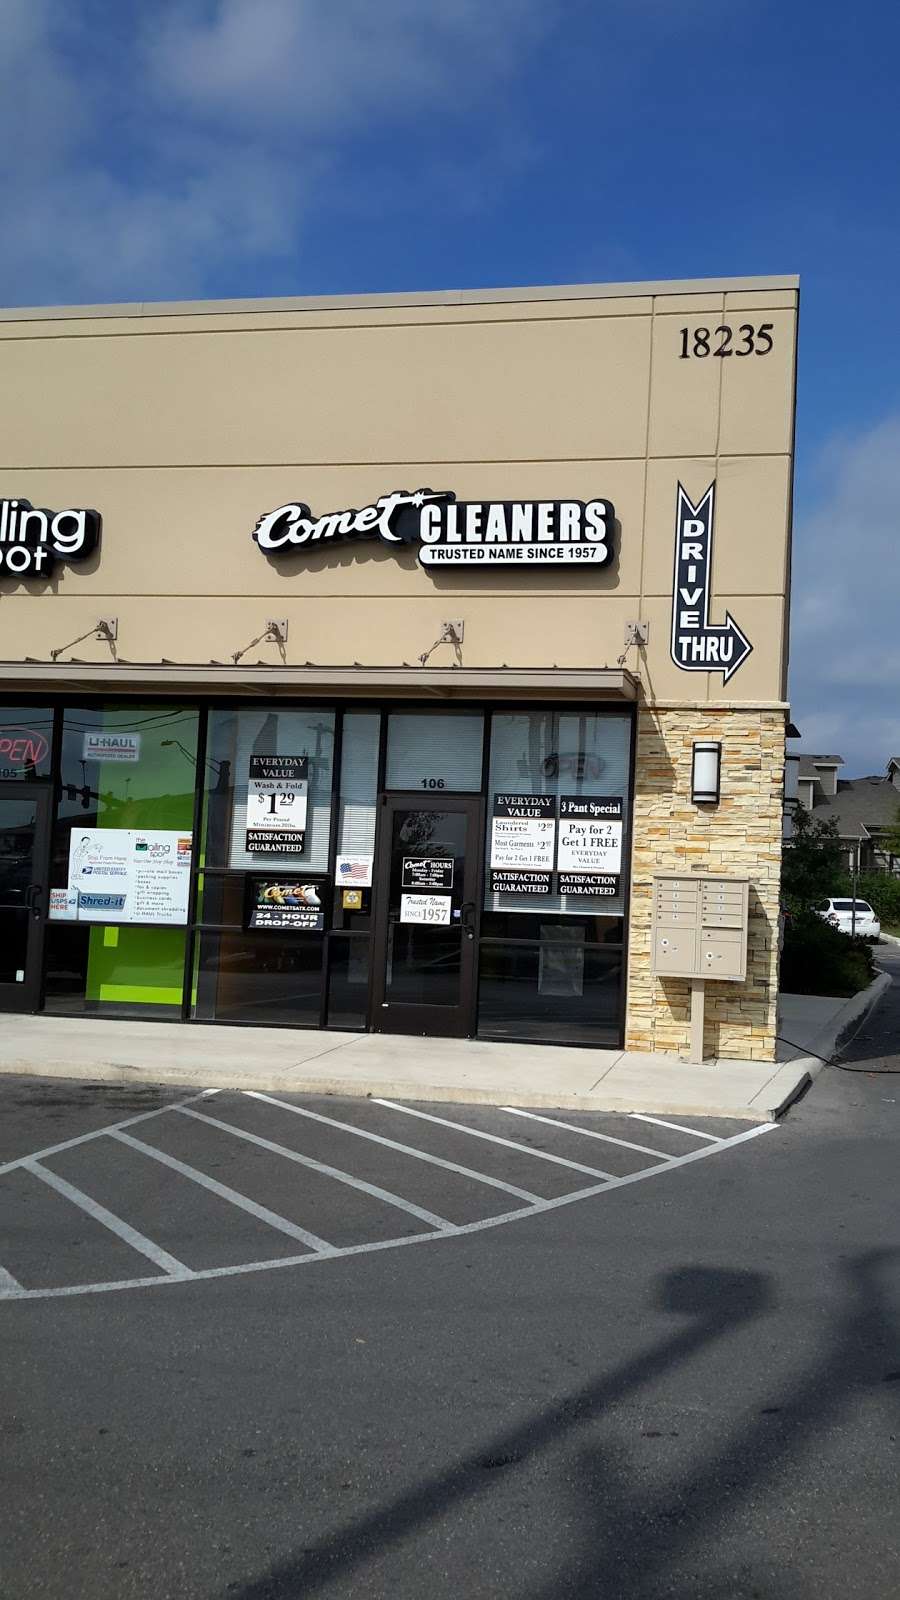 Texan Cleaners - We provide professional house and commercial cleaning  services in San Antonio and Austin Texas.